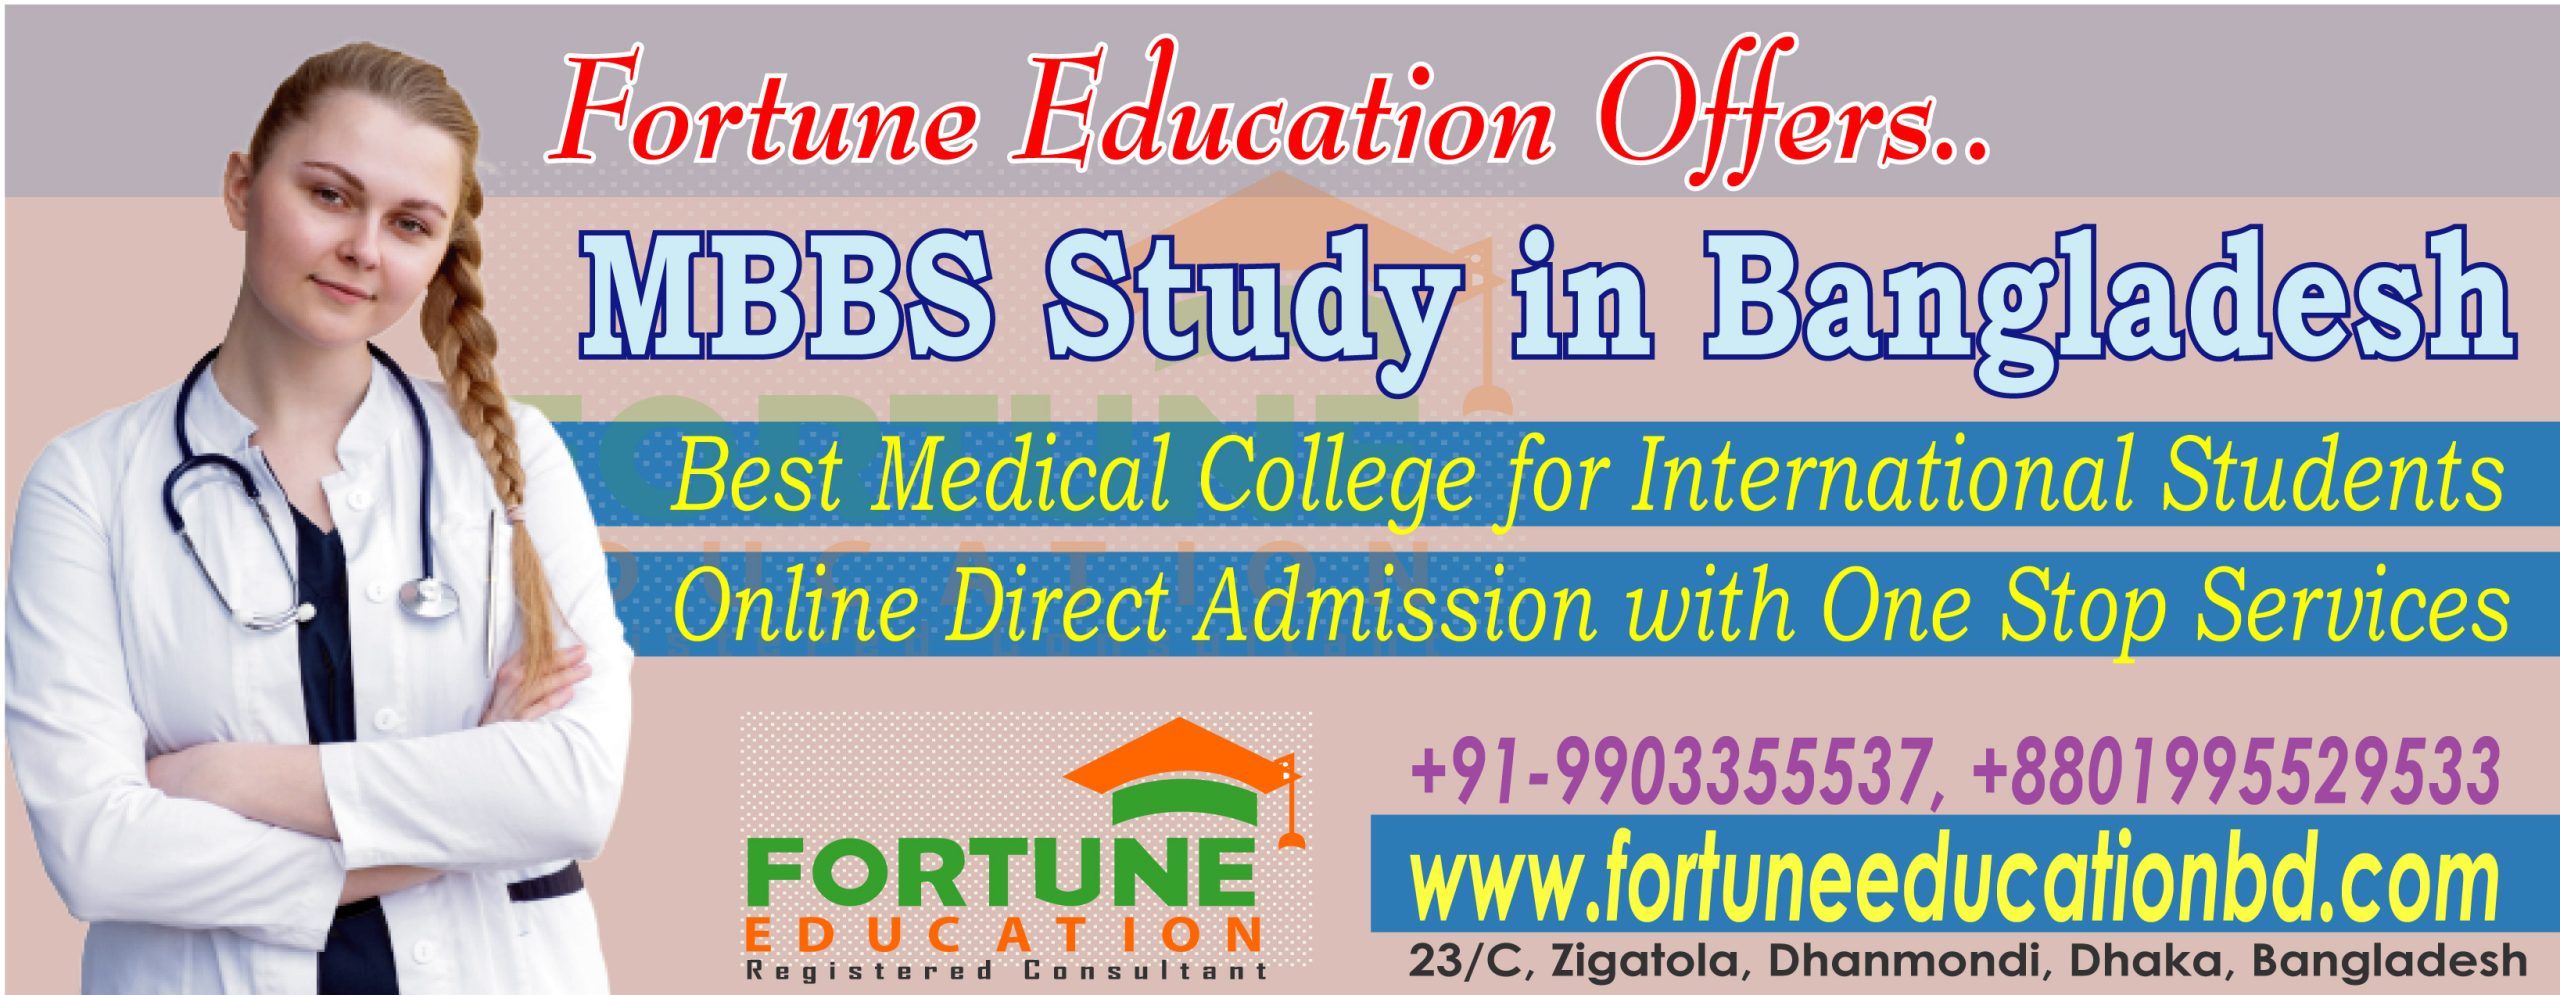 Advantages of Studying MBBS in Bangladesh